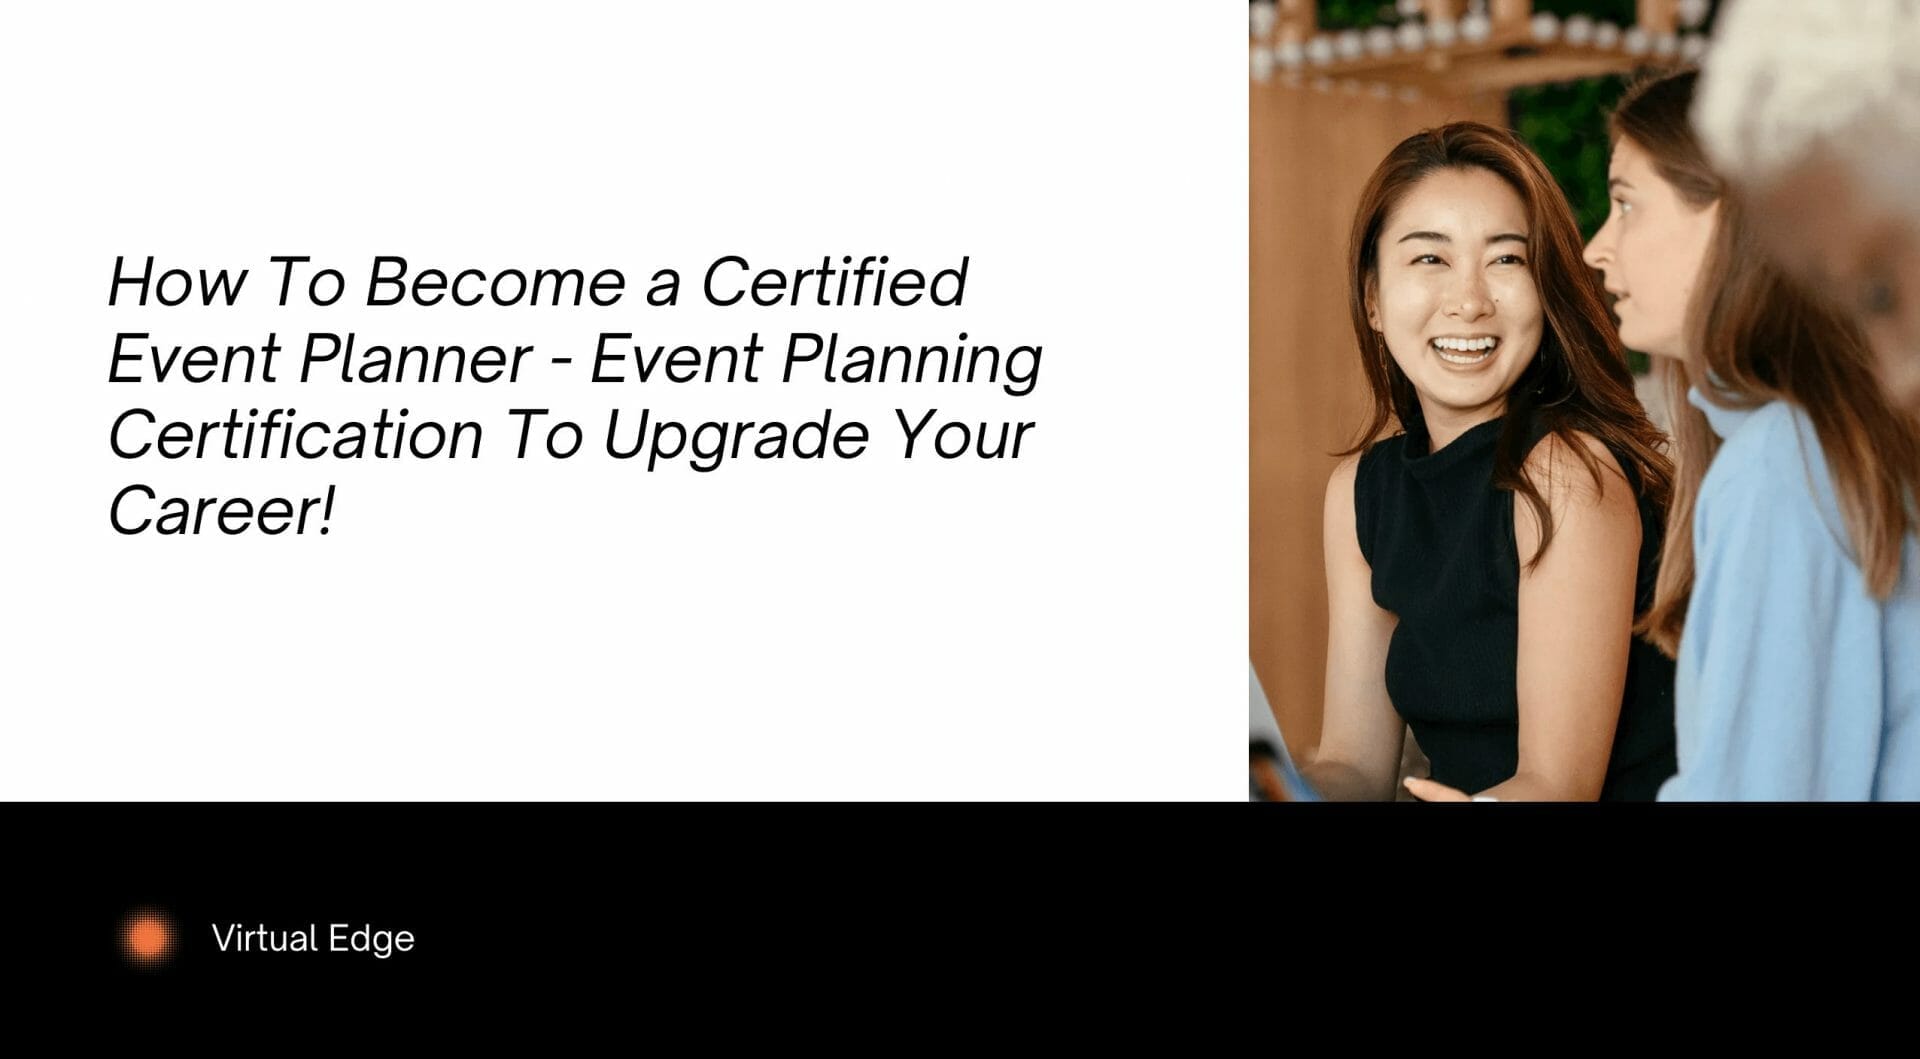 How To Become a Certified Event Planner Event Planning Certification